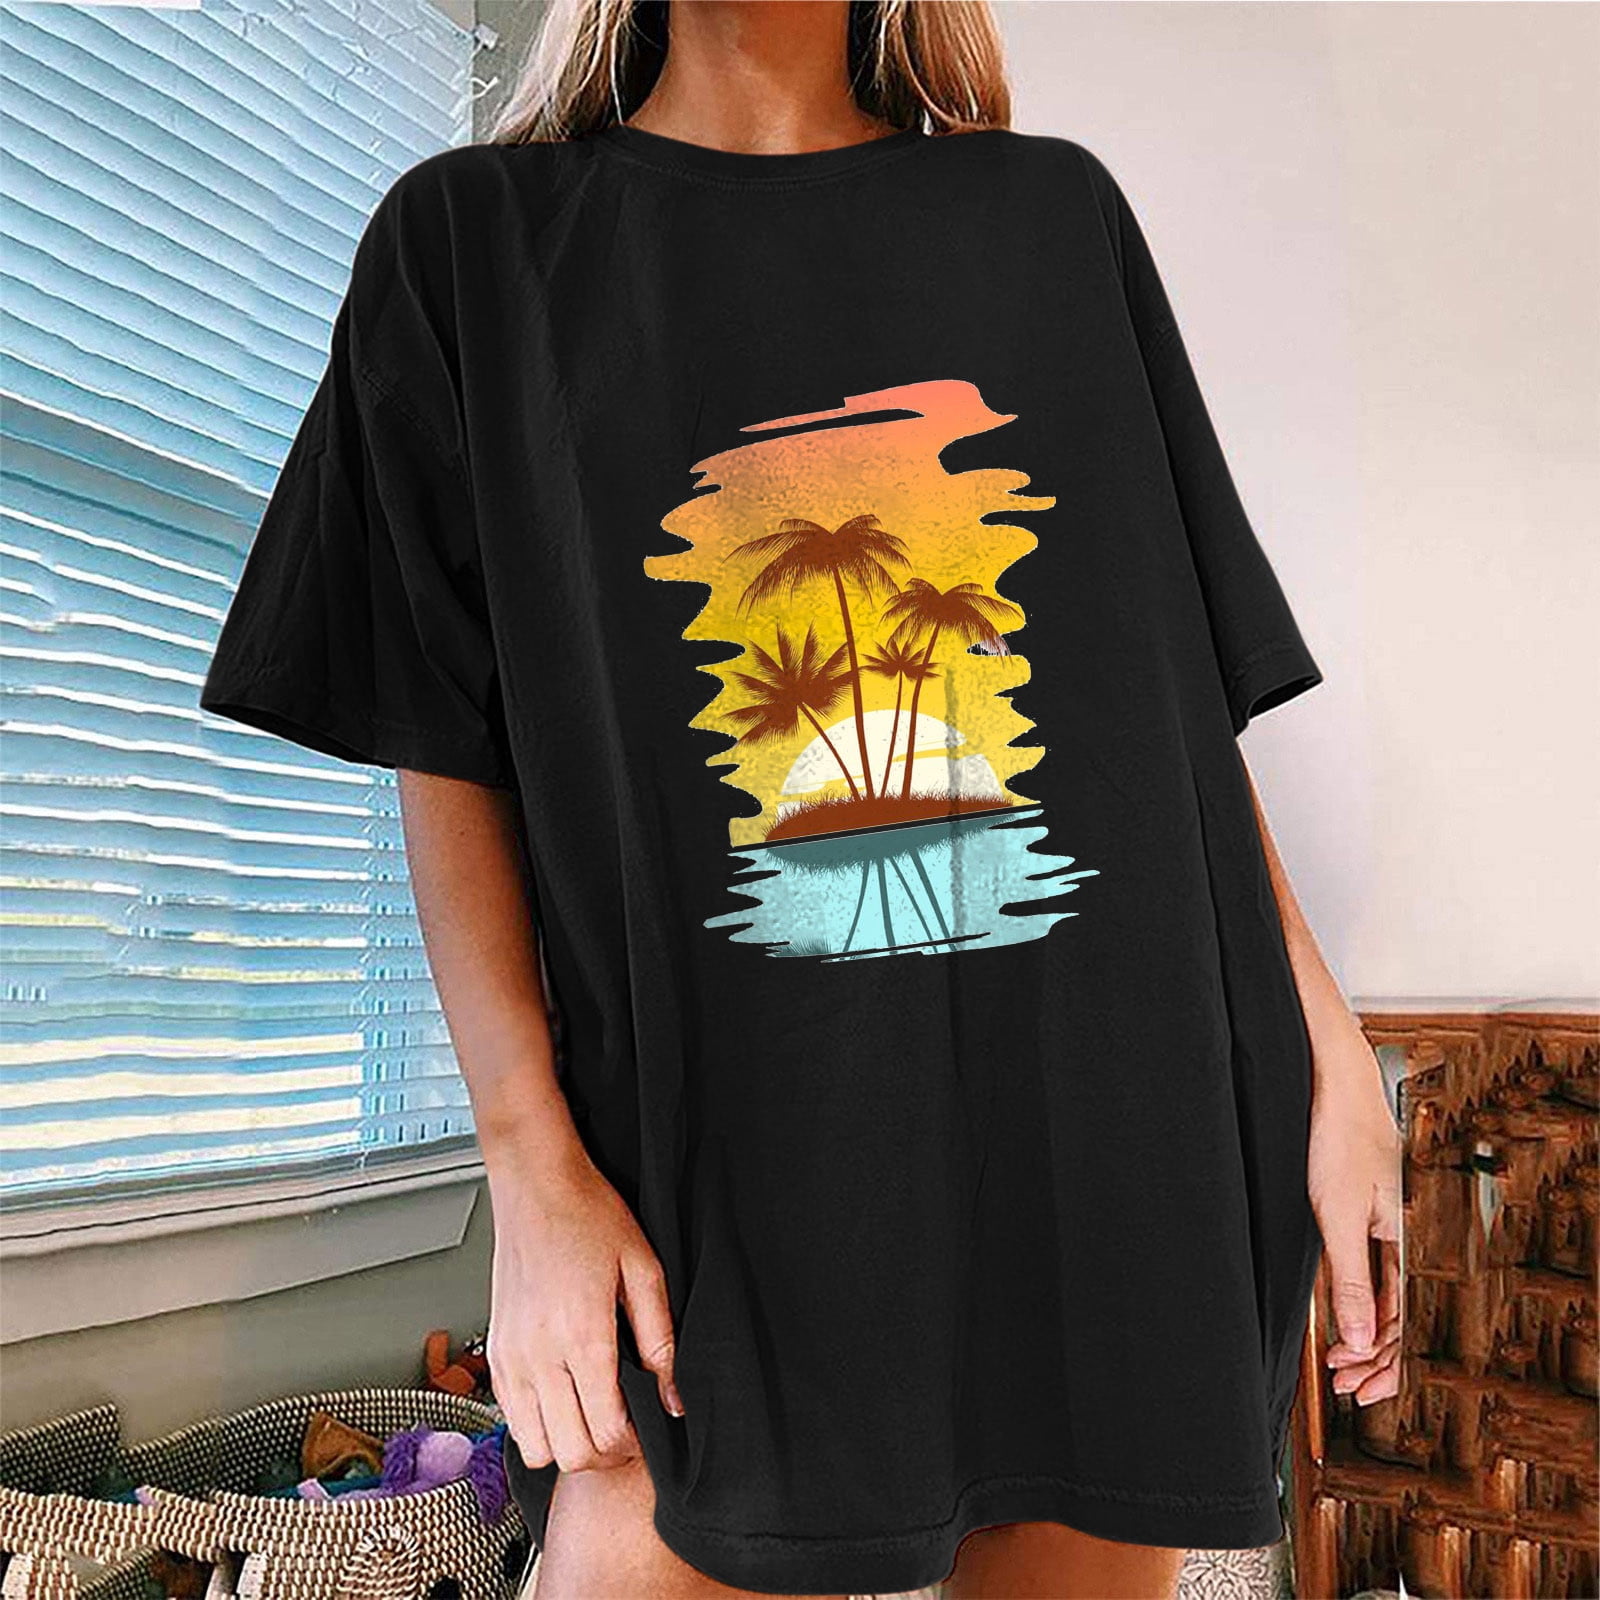 Womens Band Shirts Short Sleeve Vintage Graphic Tees Summer Casual Tops at   Women’s Clothing store